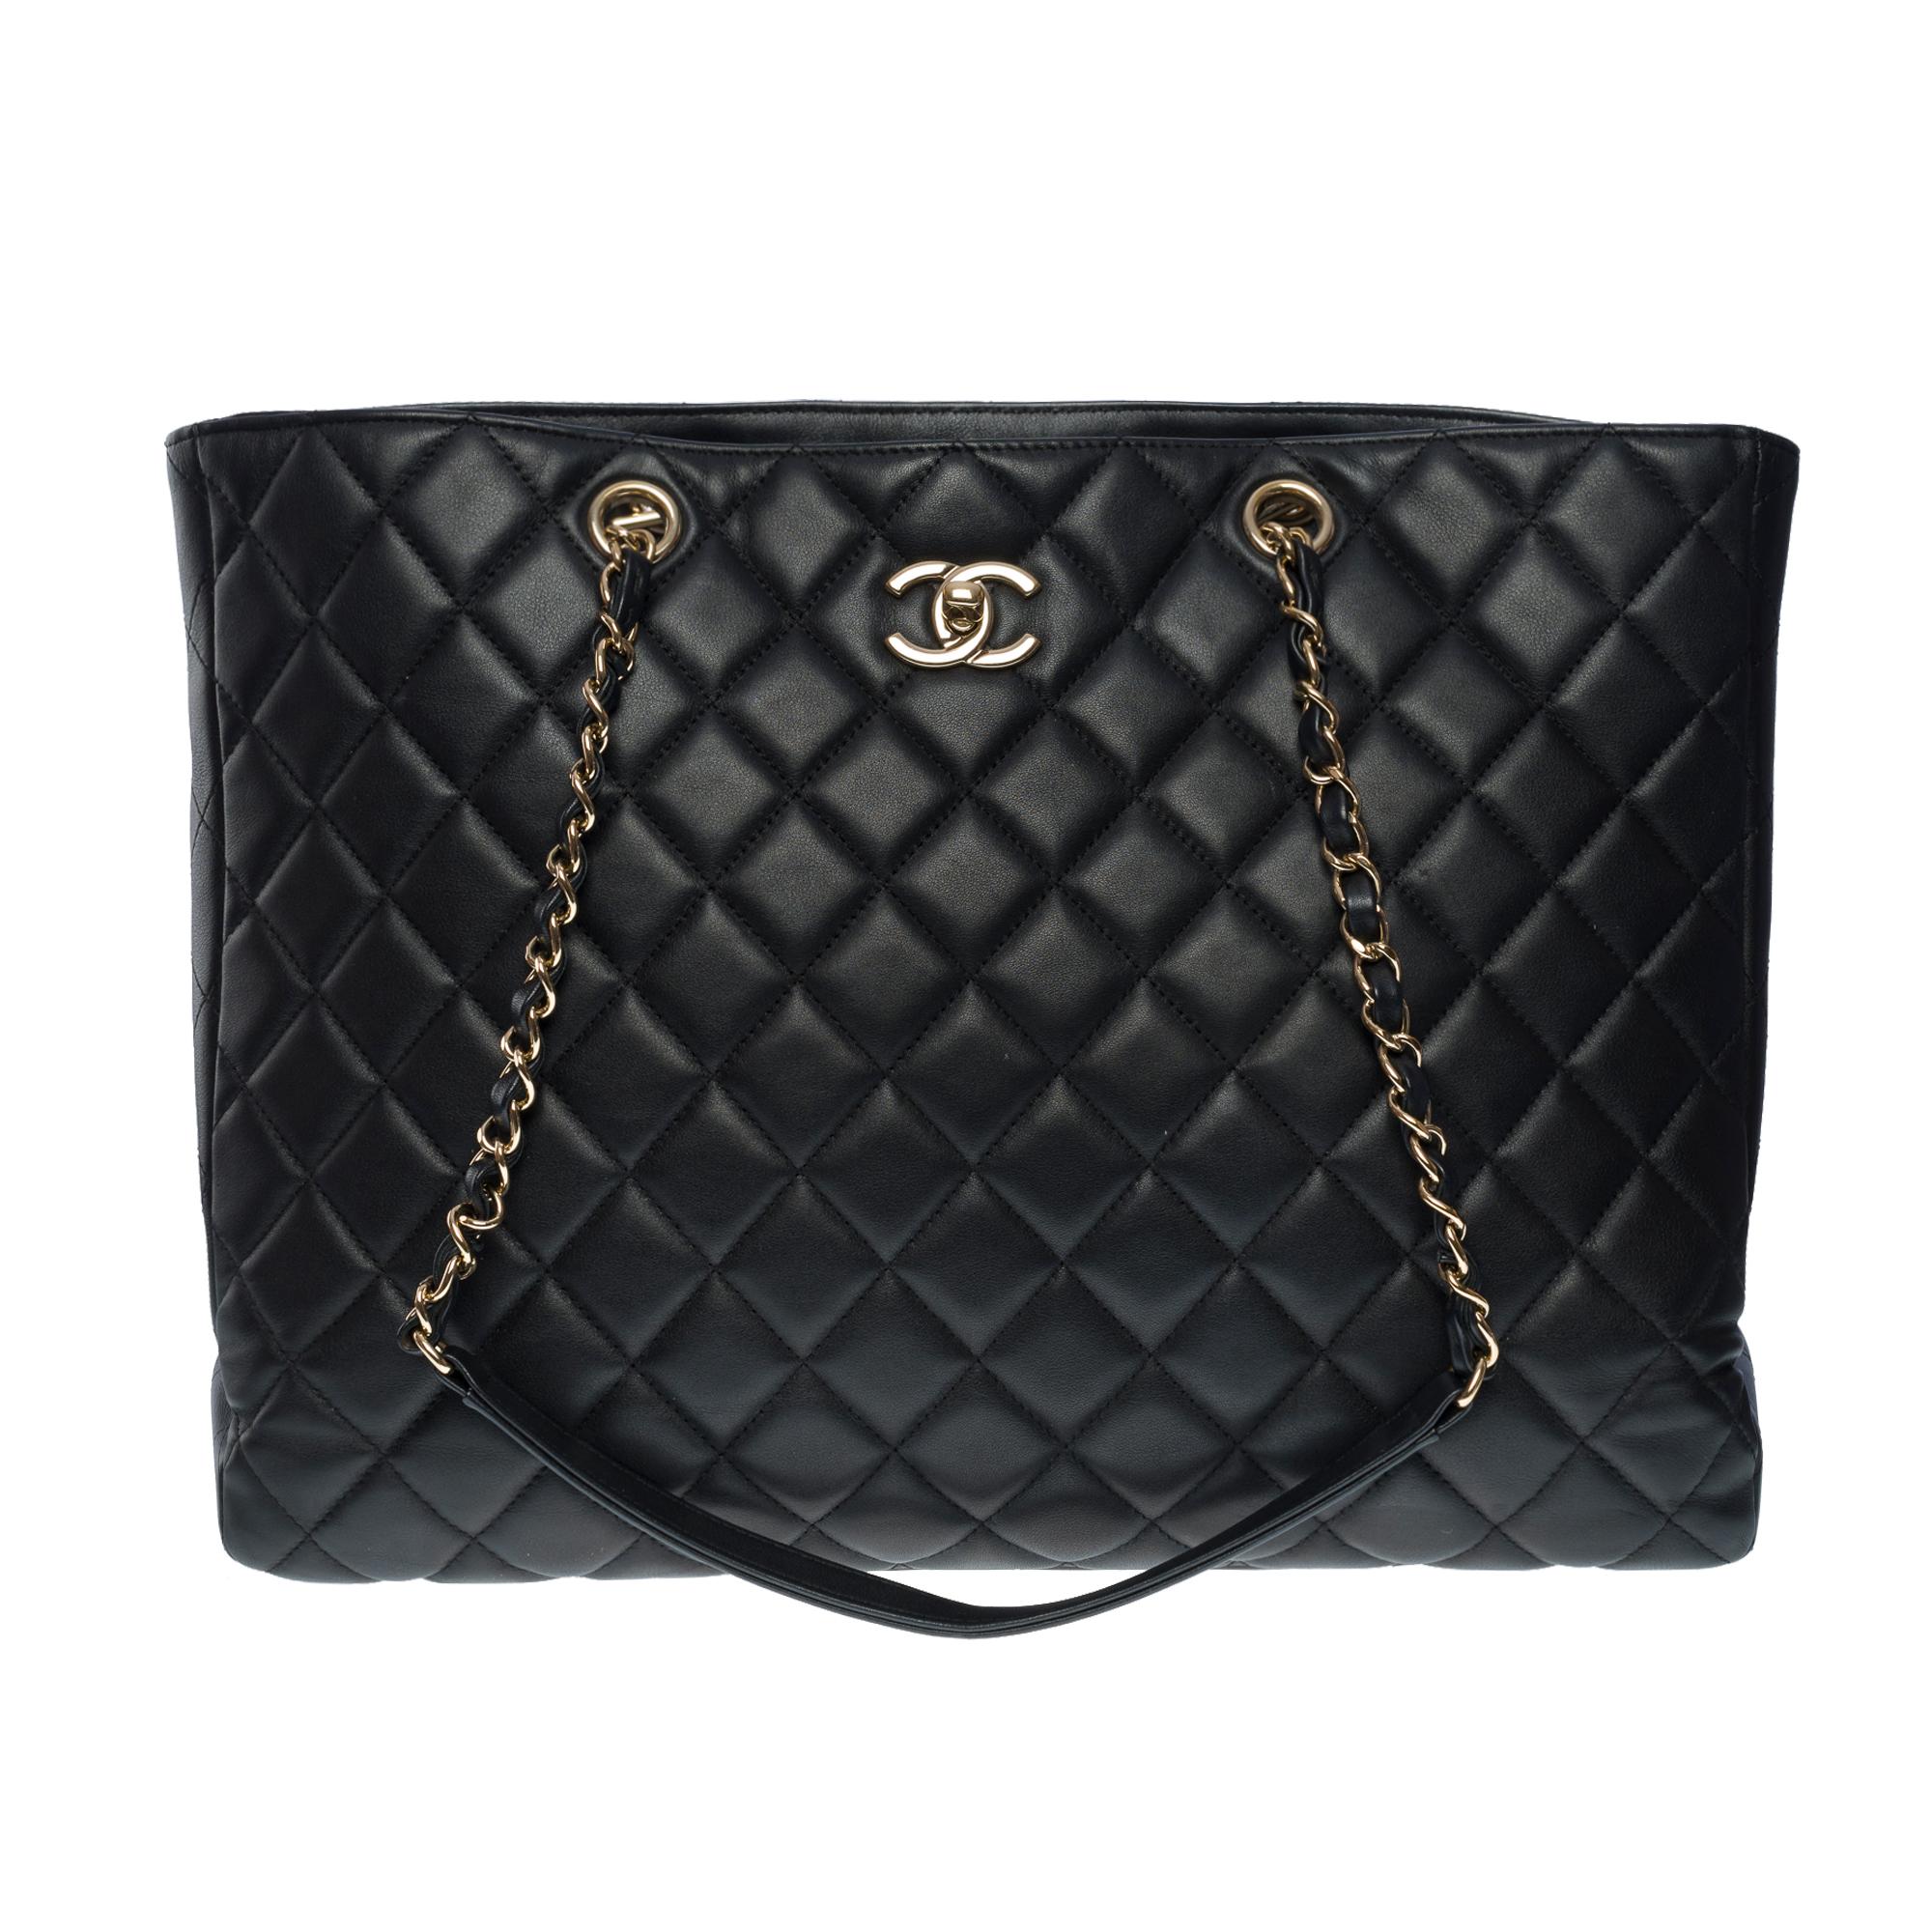 Exceptional Chanel Grand Shopping Tote bag in black quilted lambskin leather, silver metal hardware, double handle in silver metal interlaced with black leather for a hand and shoulder support

Backpack pocket
Snap closure on top
Black canvas